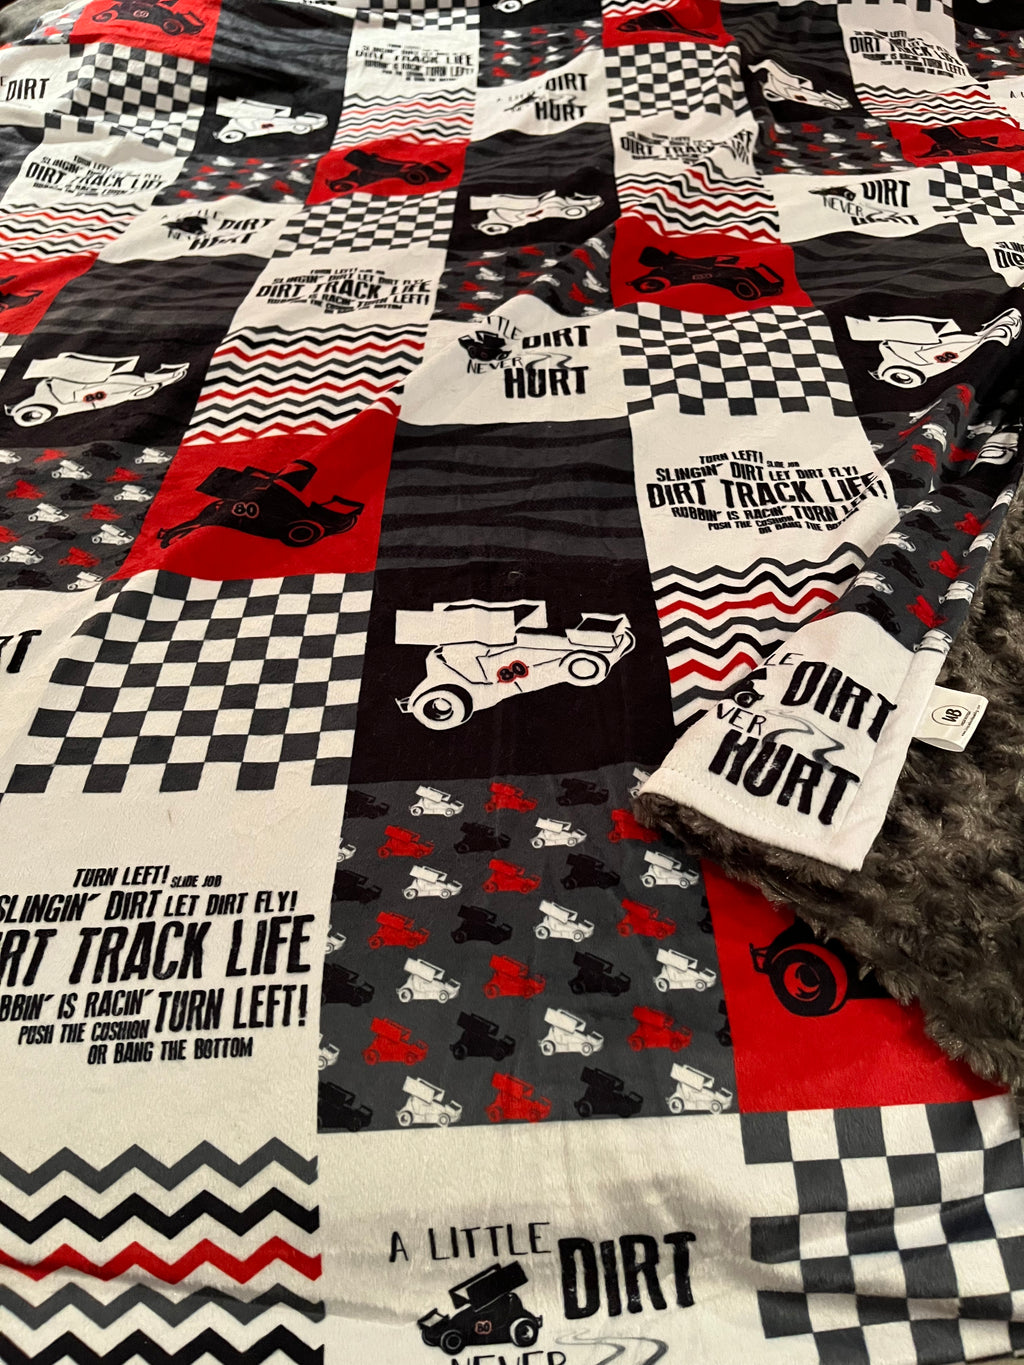 Sprint Cars & Dirt Never Hurt on Red Quilt Blocks Minky Blanket **Ready to Ship